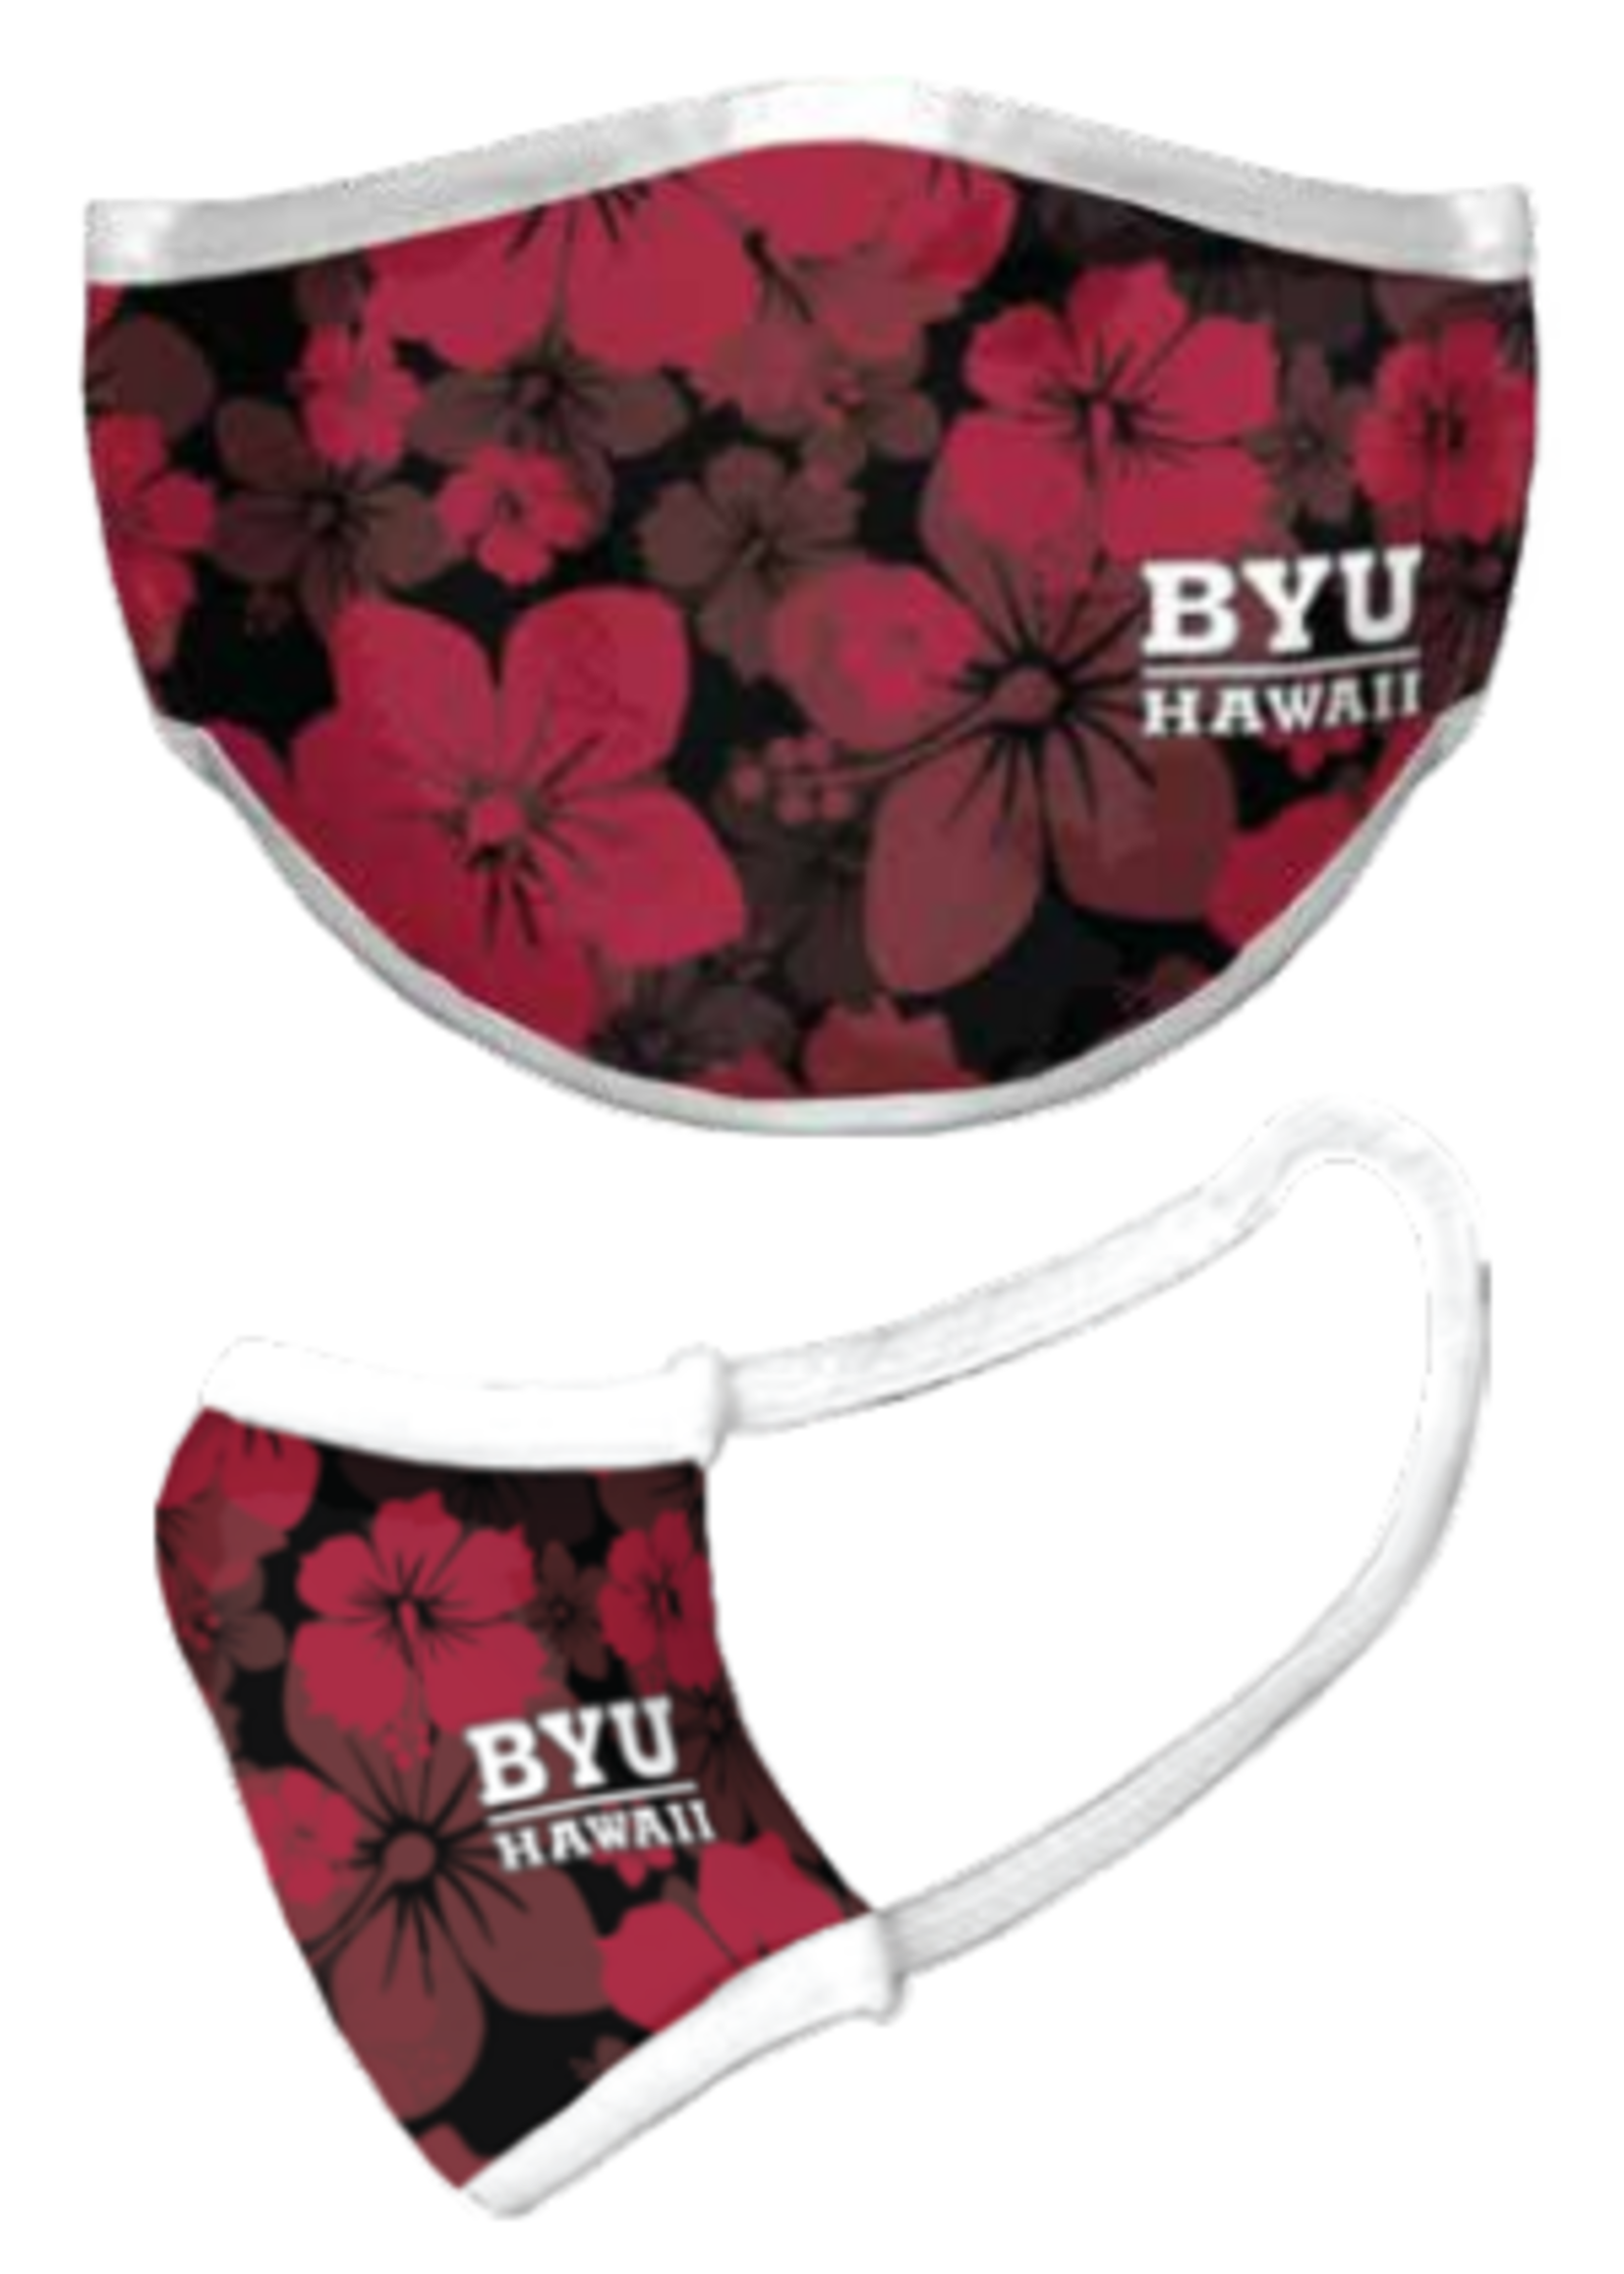 DISC Face Mask - BYU Hawaii Floral